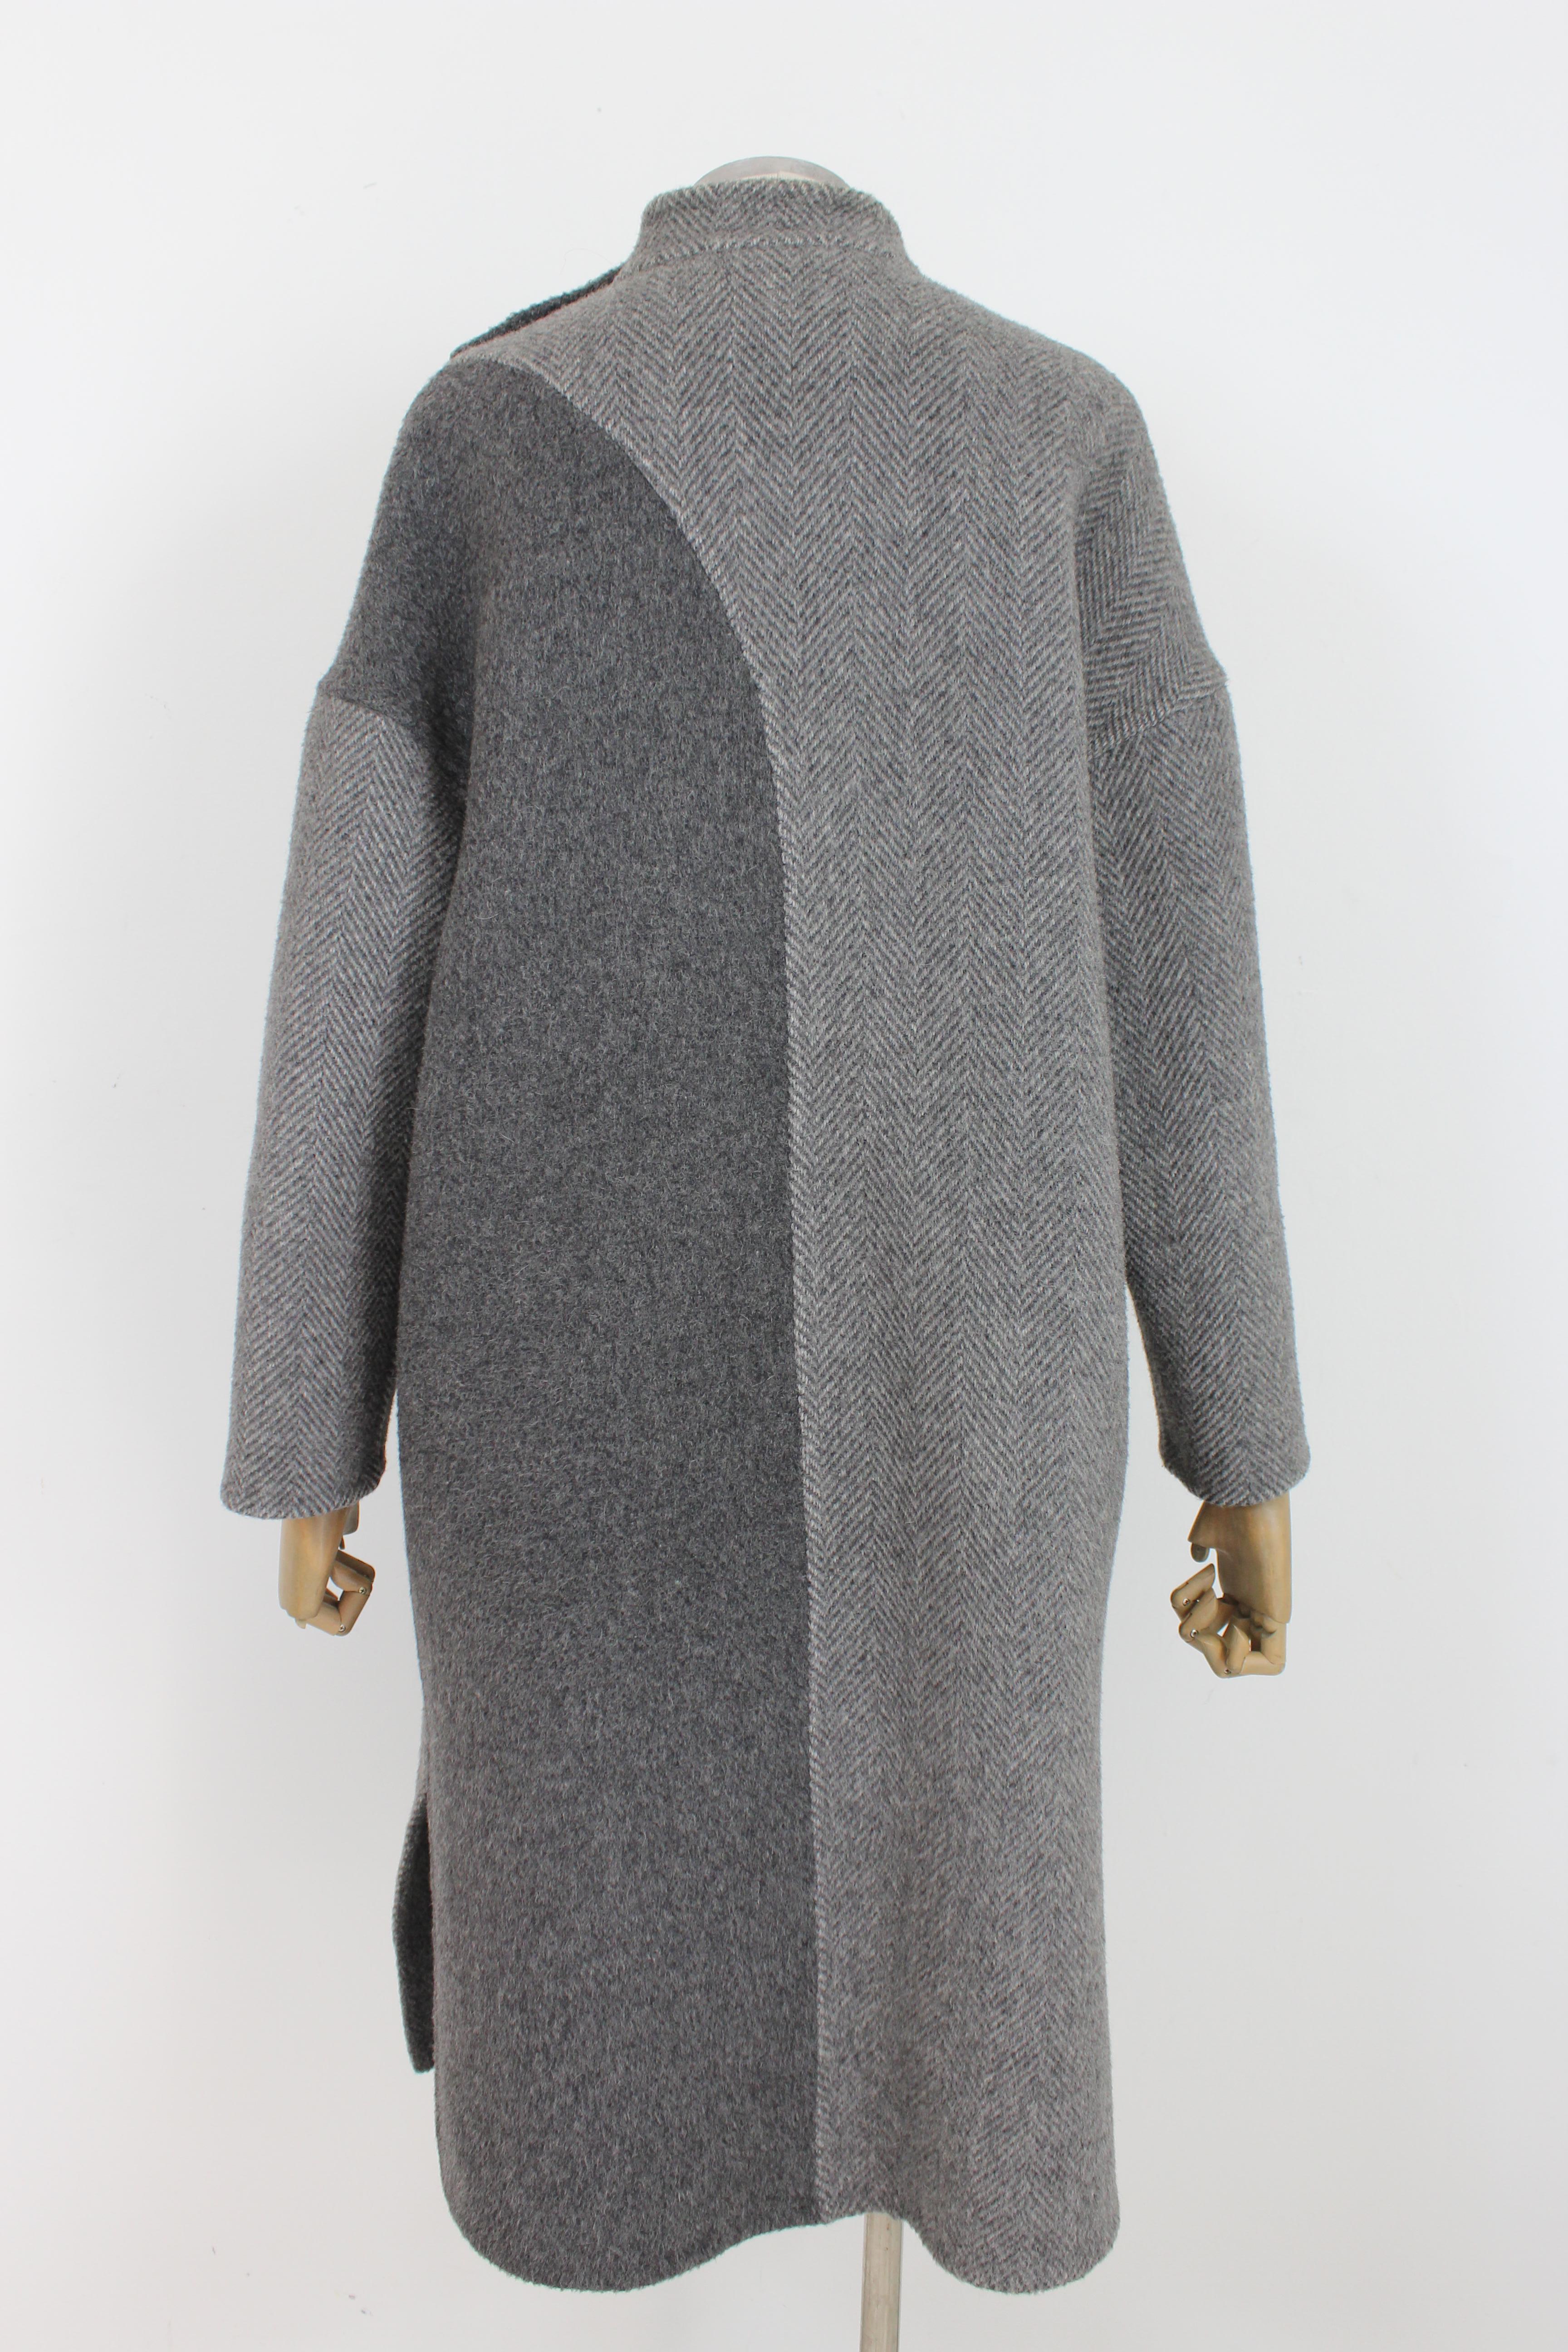 Roberta di Camerino 70s vintage coat. In gray color, herringbone pattern. Closure with small gold-colored buttons with logo, three pockets at the waist with zip closure. Fabric 70% alpaca, 30% virgin wool. Made in Italy.

Size: 44 It 10 Us 12